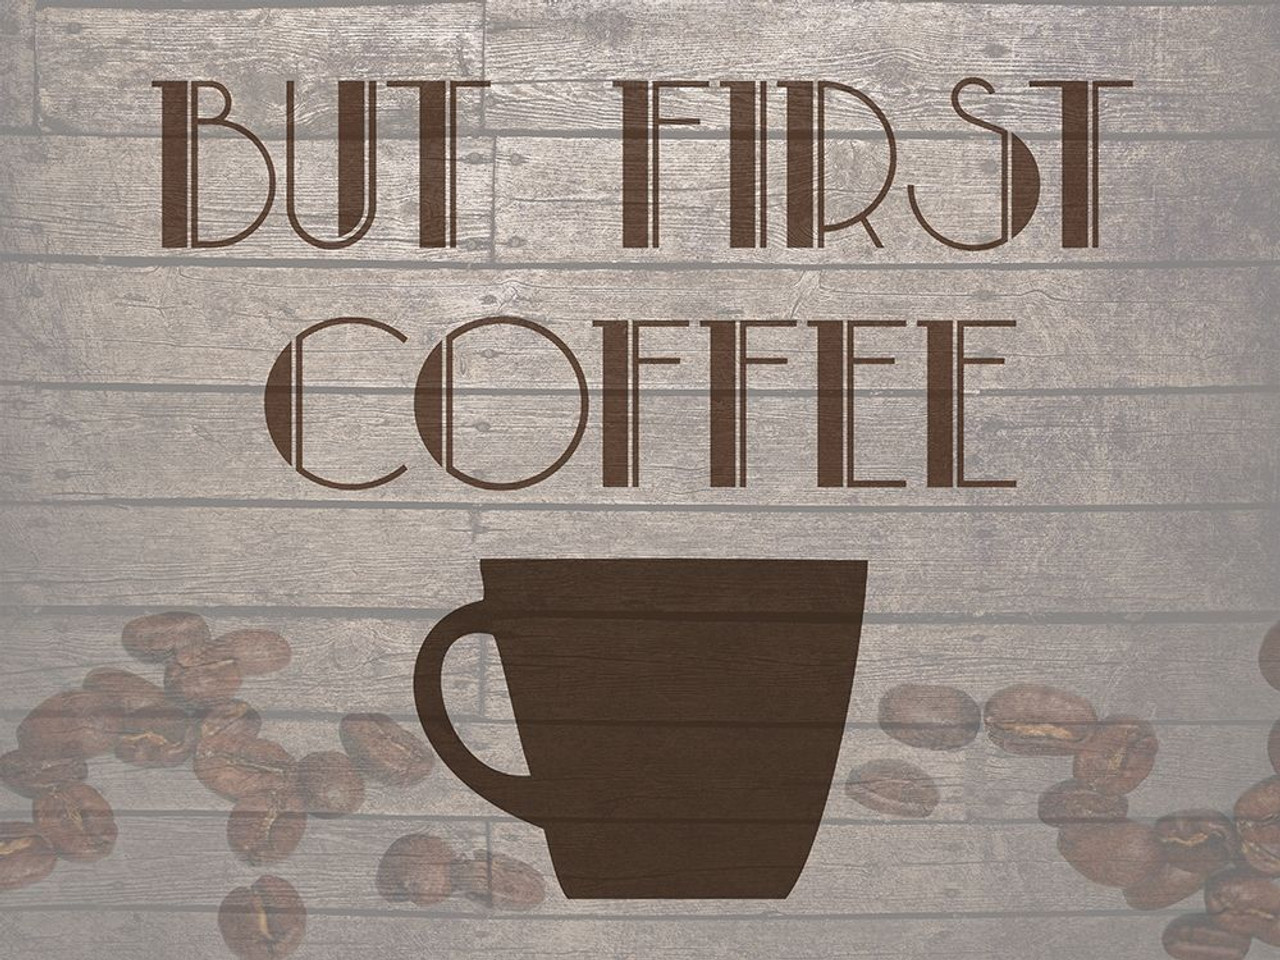 Coffee First Poster Print by Jamie Phillip # JRH48B - Posterazzi